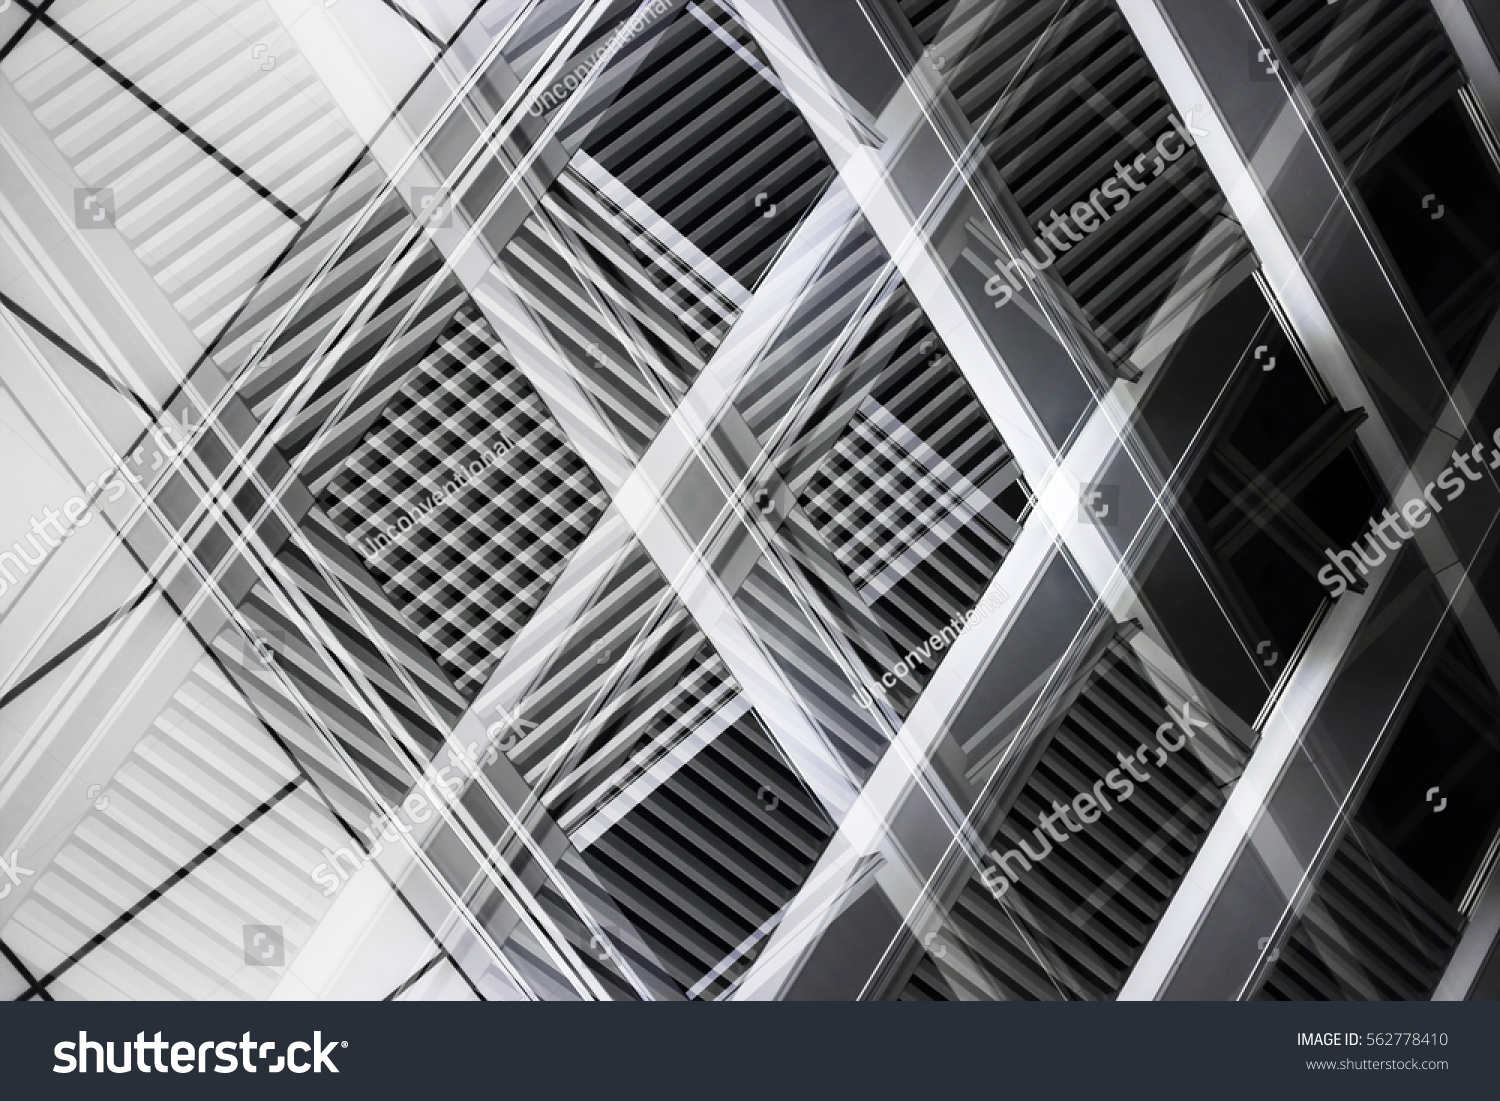 Overlay of grid structures. Grunge reworked photo of louvered windows. Abstract black and white image on the subject of industrial architecture and interior. #562778410